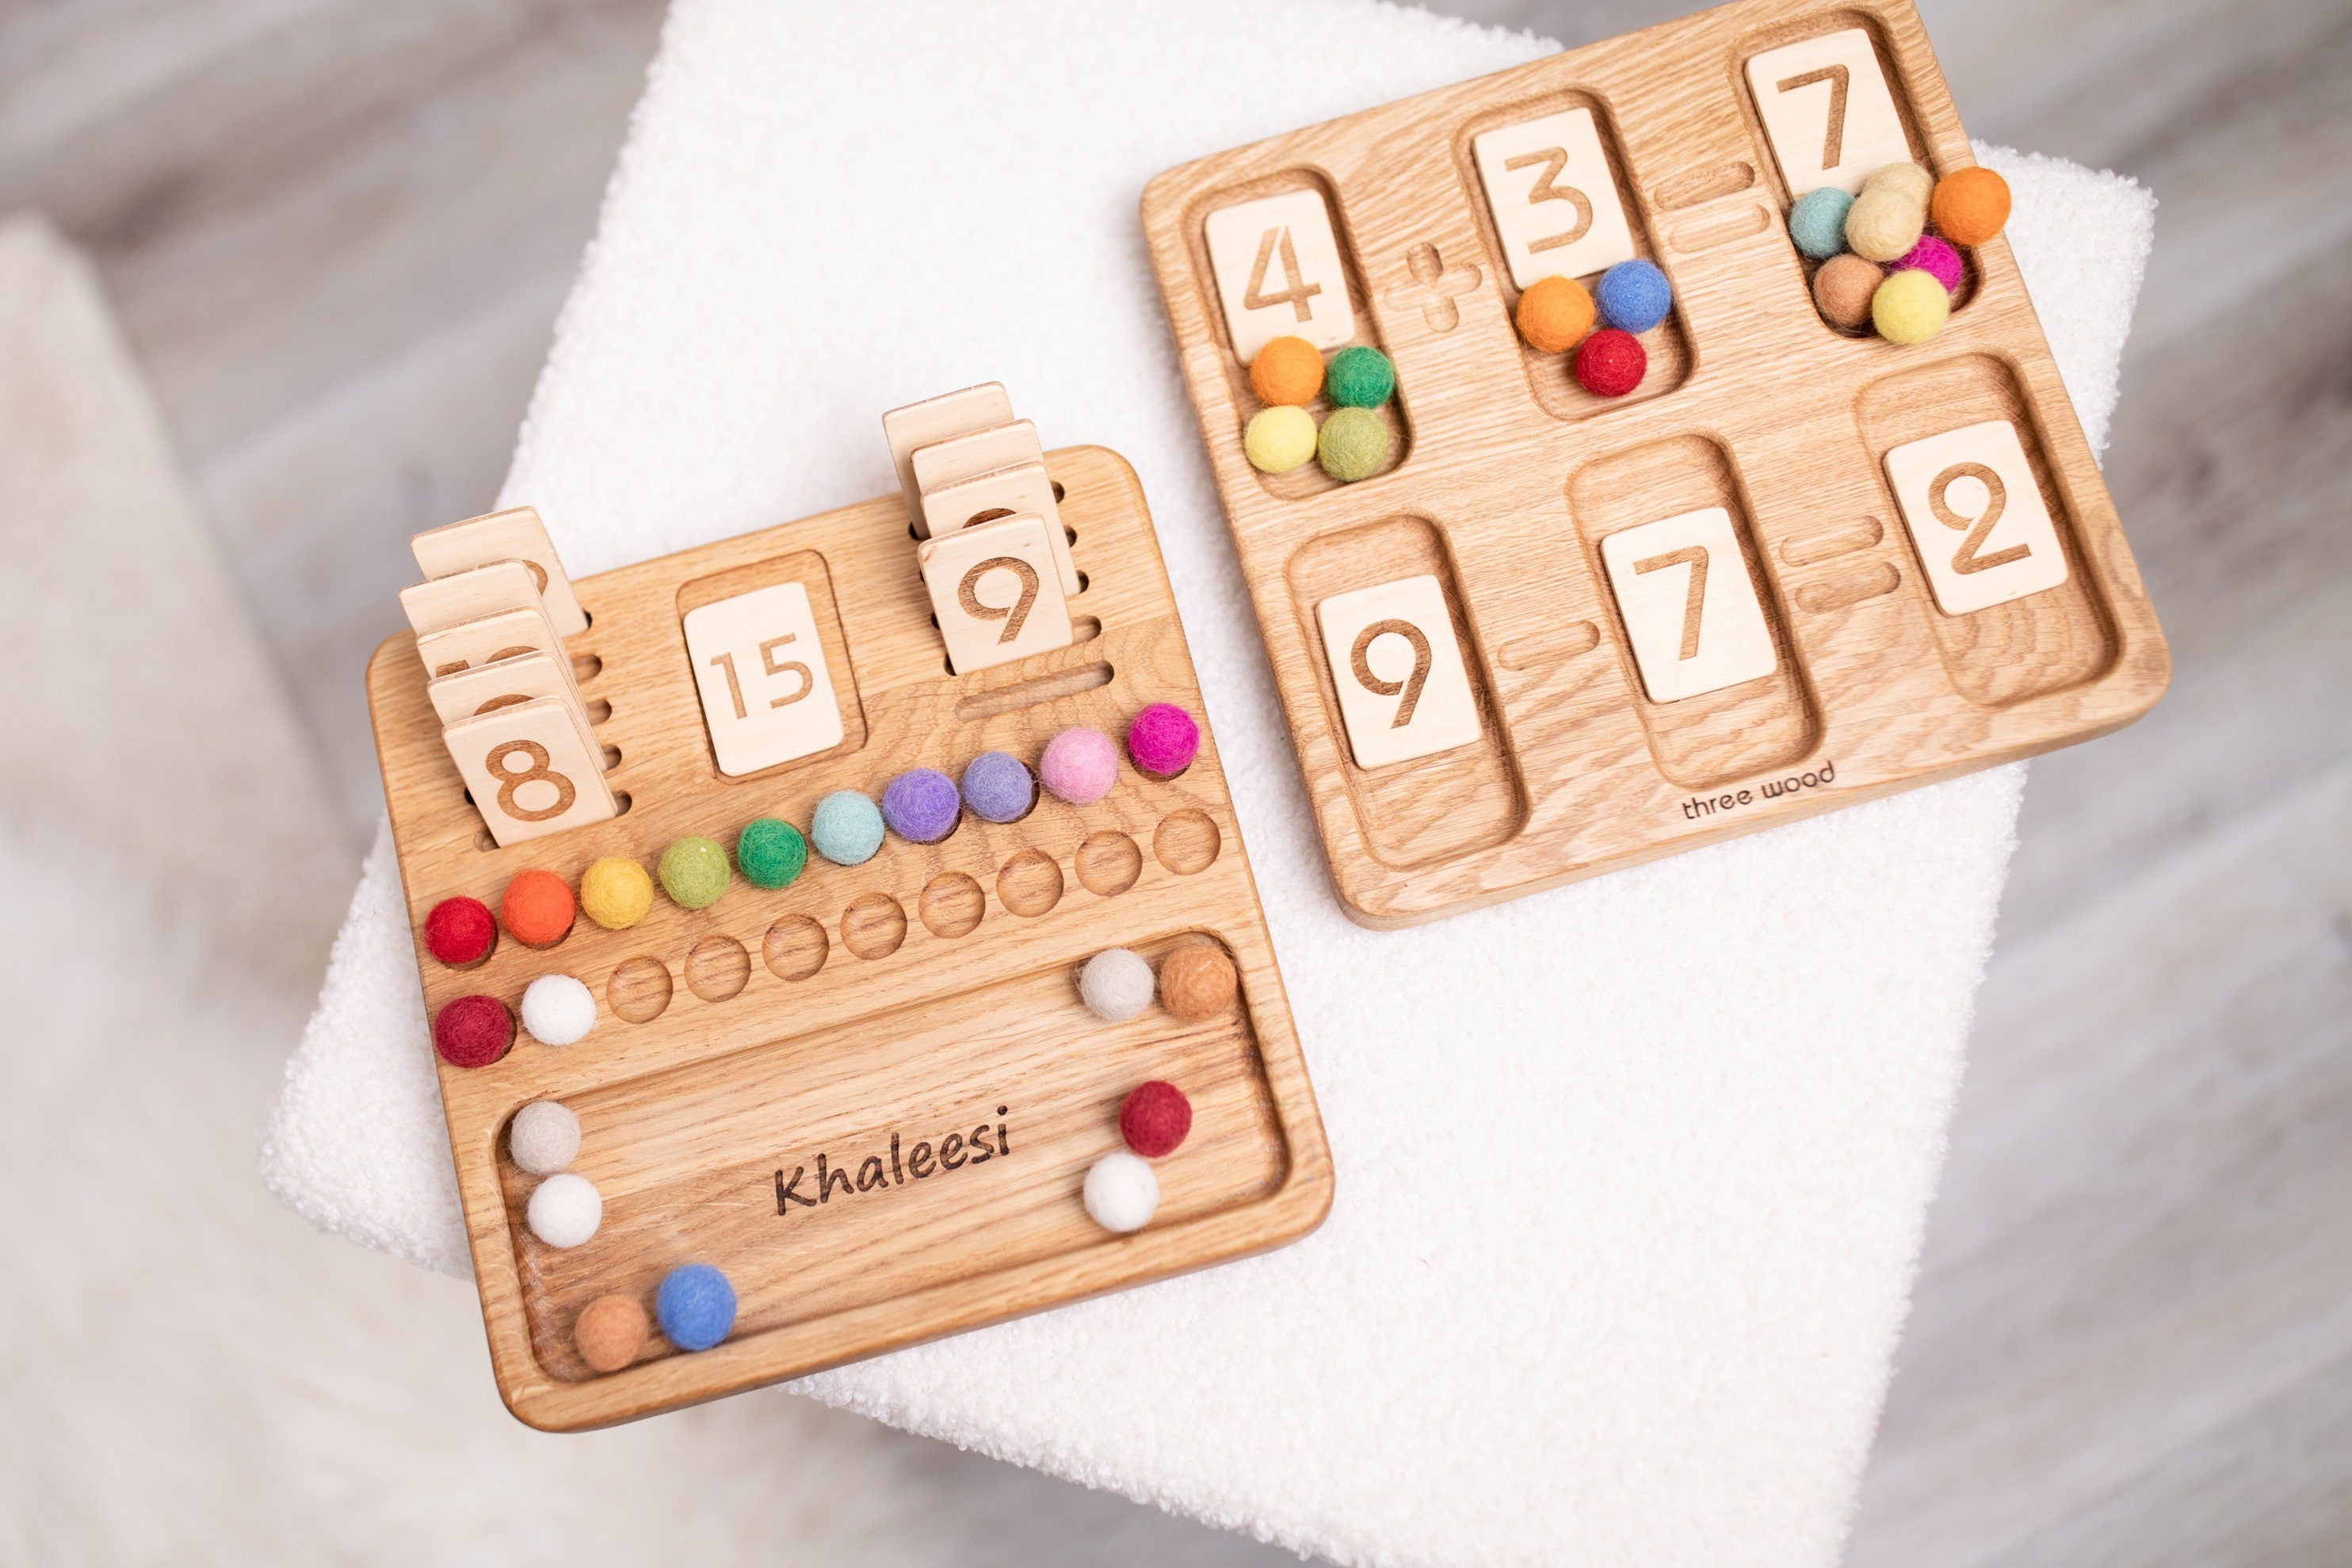 Montessori Math reversible board+number cards 1-20 preschool homeschool learning resource educational Personalized gift for kids